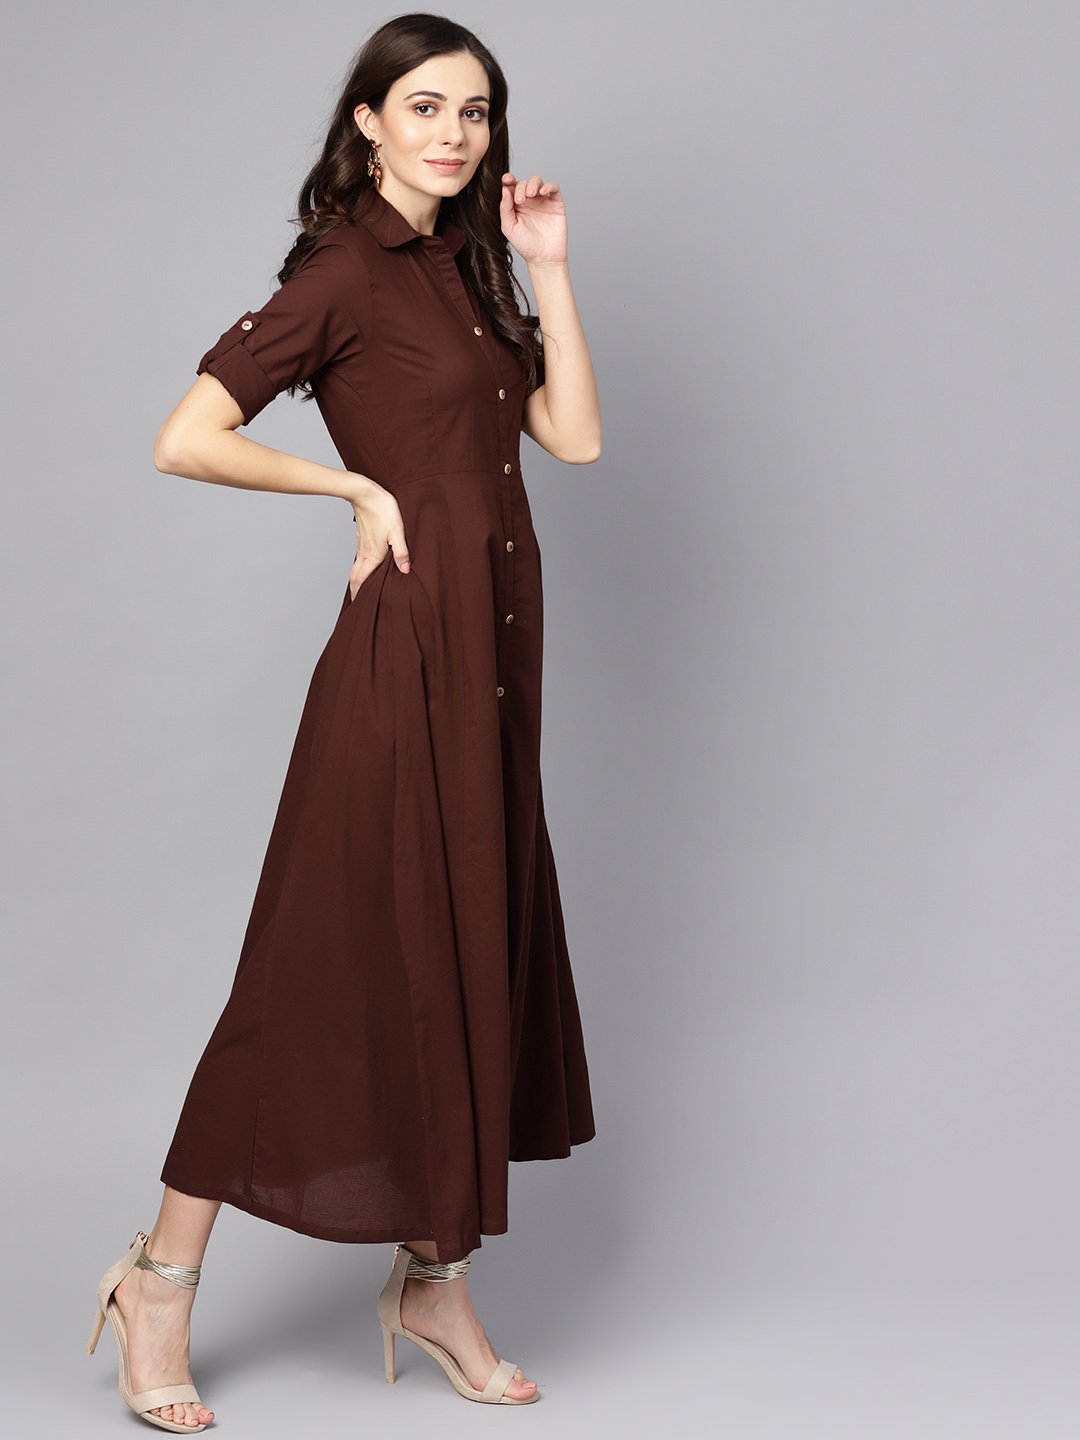 Women's Solid Chocolate Brown Maxi Dress With Shirt Collar & 3/4 Sleeves - Nayo Clothing